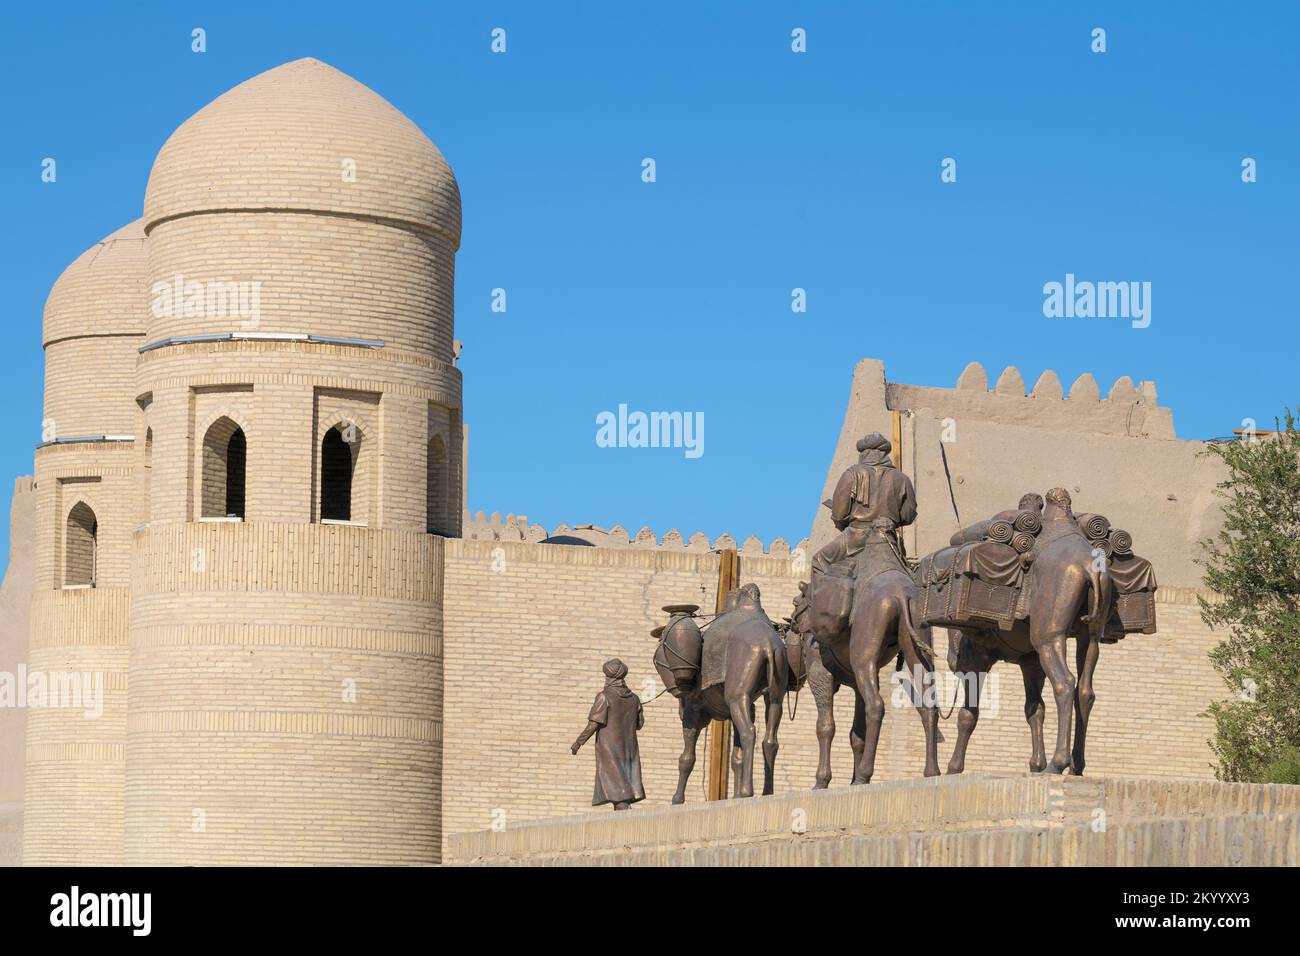 KHIVA, UZBEKISTAN - SEPTEMBER 05, 2022: The sculptural composition of Caravan at the walls of the Ichan-Kala inner city on a sunny day Stock Photo